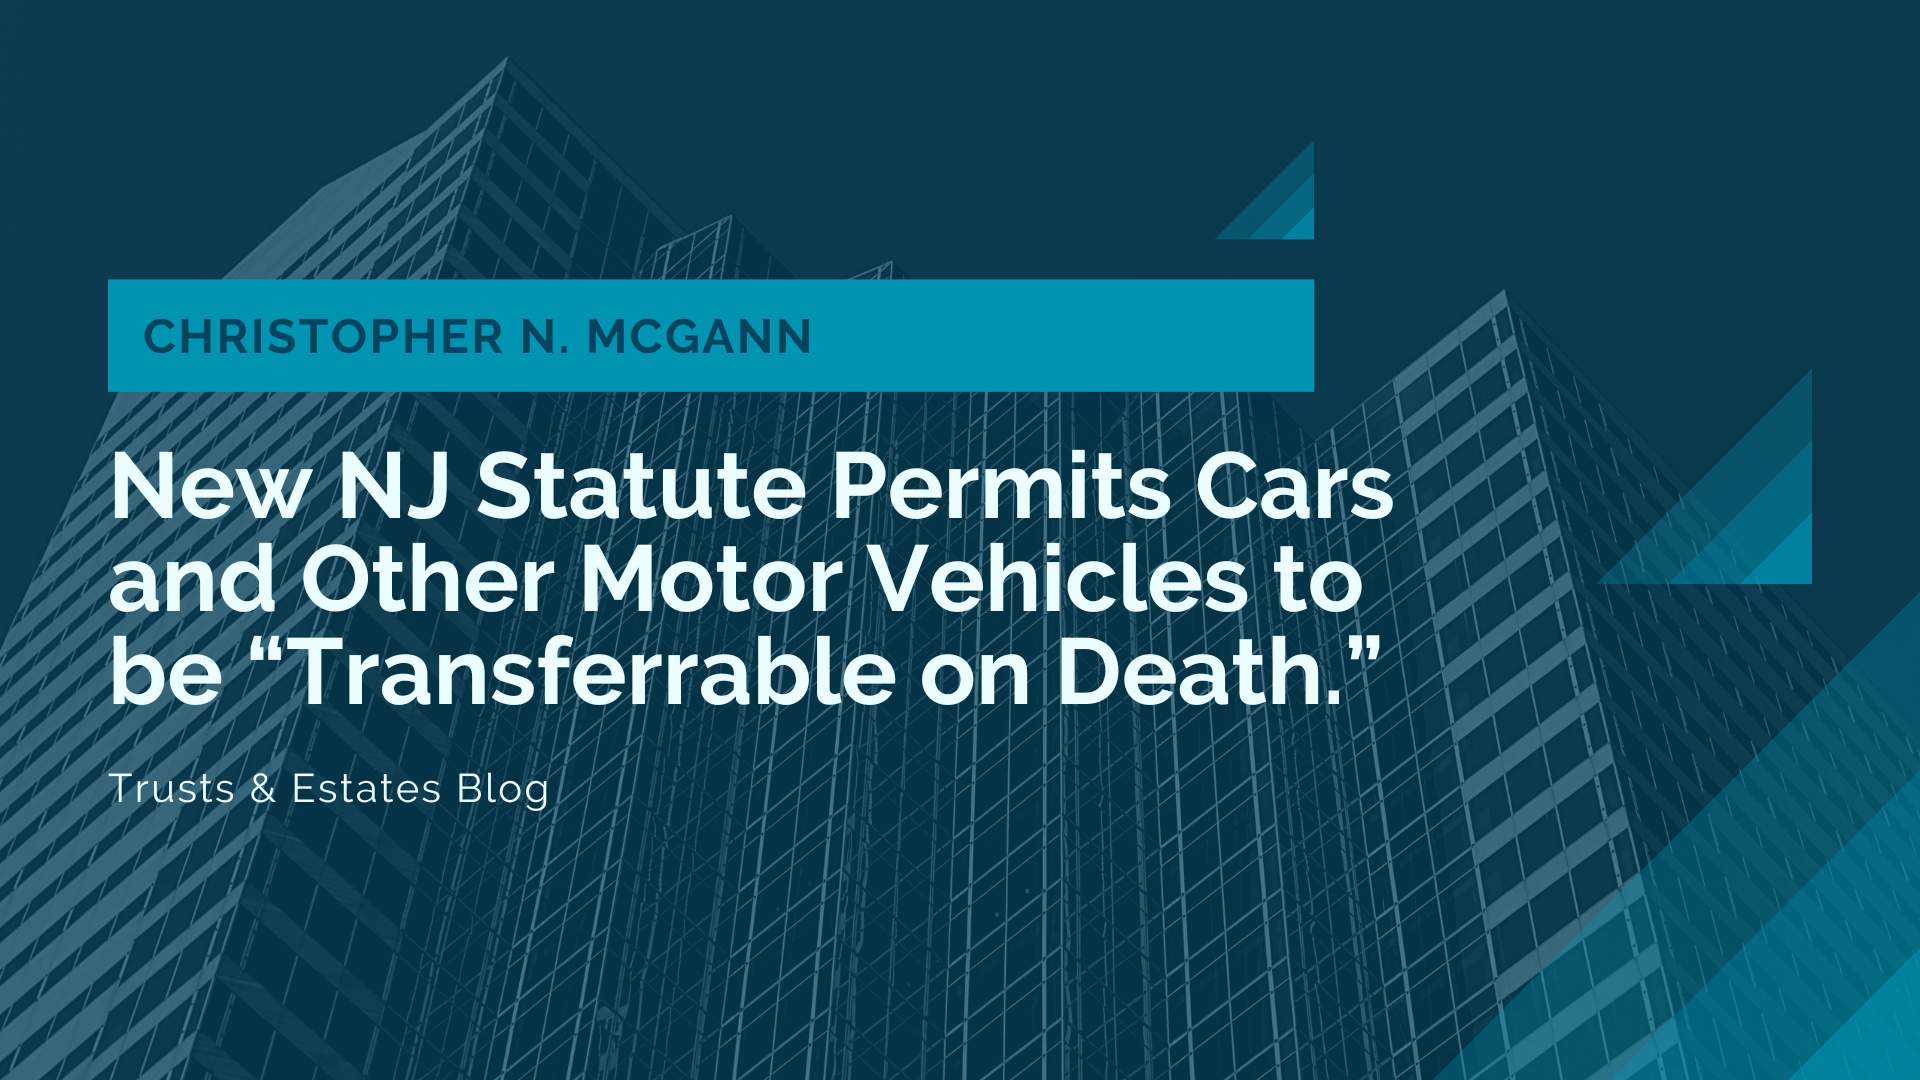 New NJ Statute Permits Cars and Other Motor Vehicles to be Transferrable on Death.